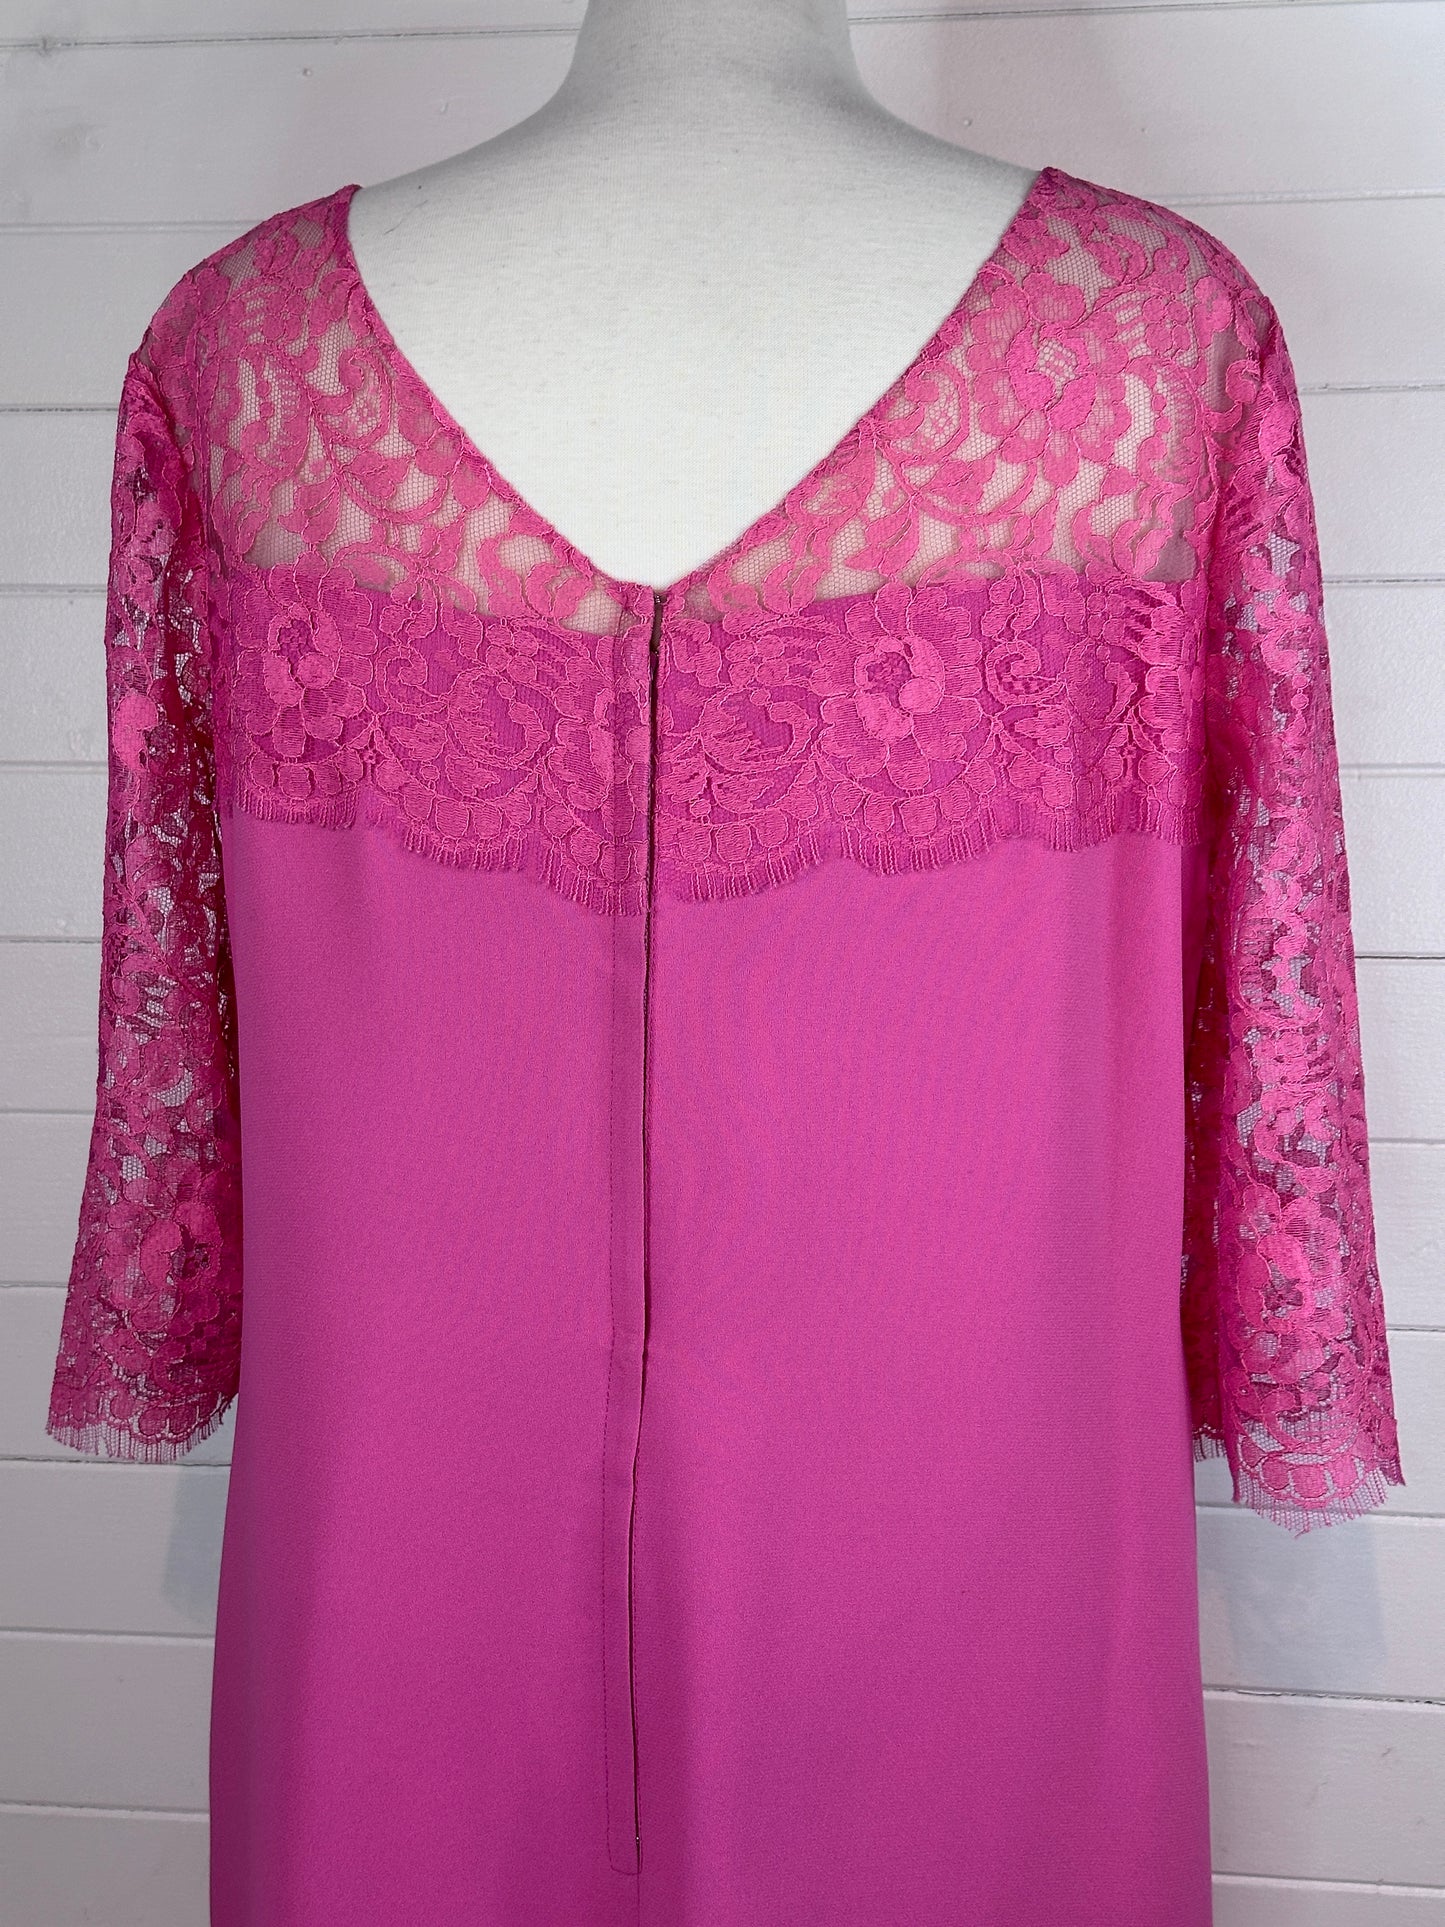 1960's Barbie Hot Pink Crépe Cocktail Dress with Chantilly Lace (L - XL)